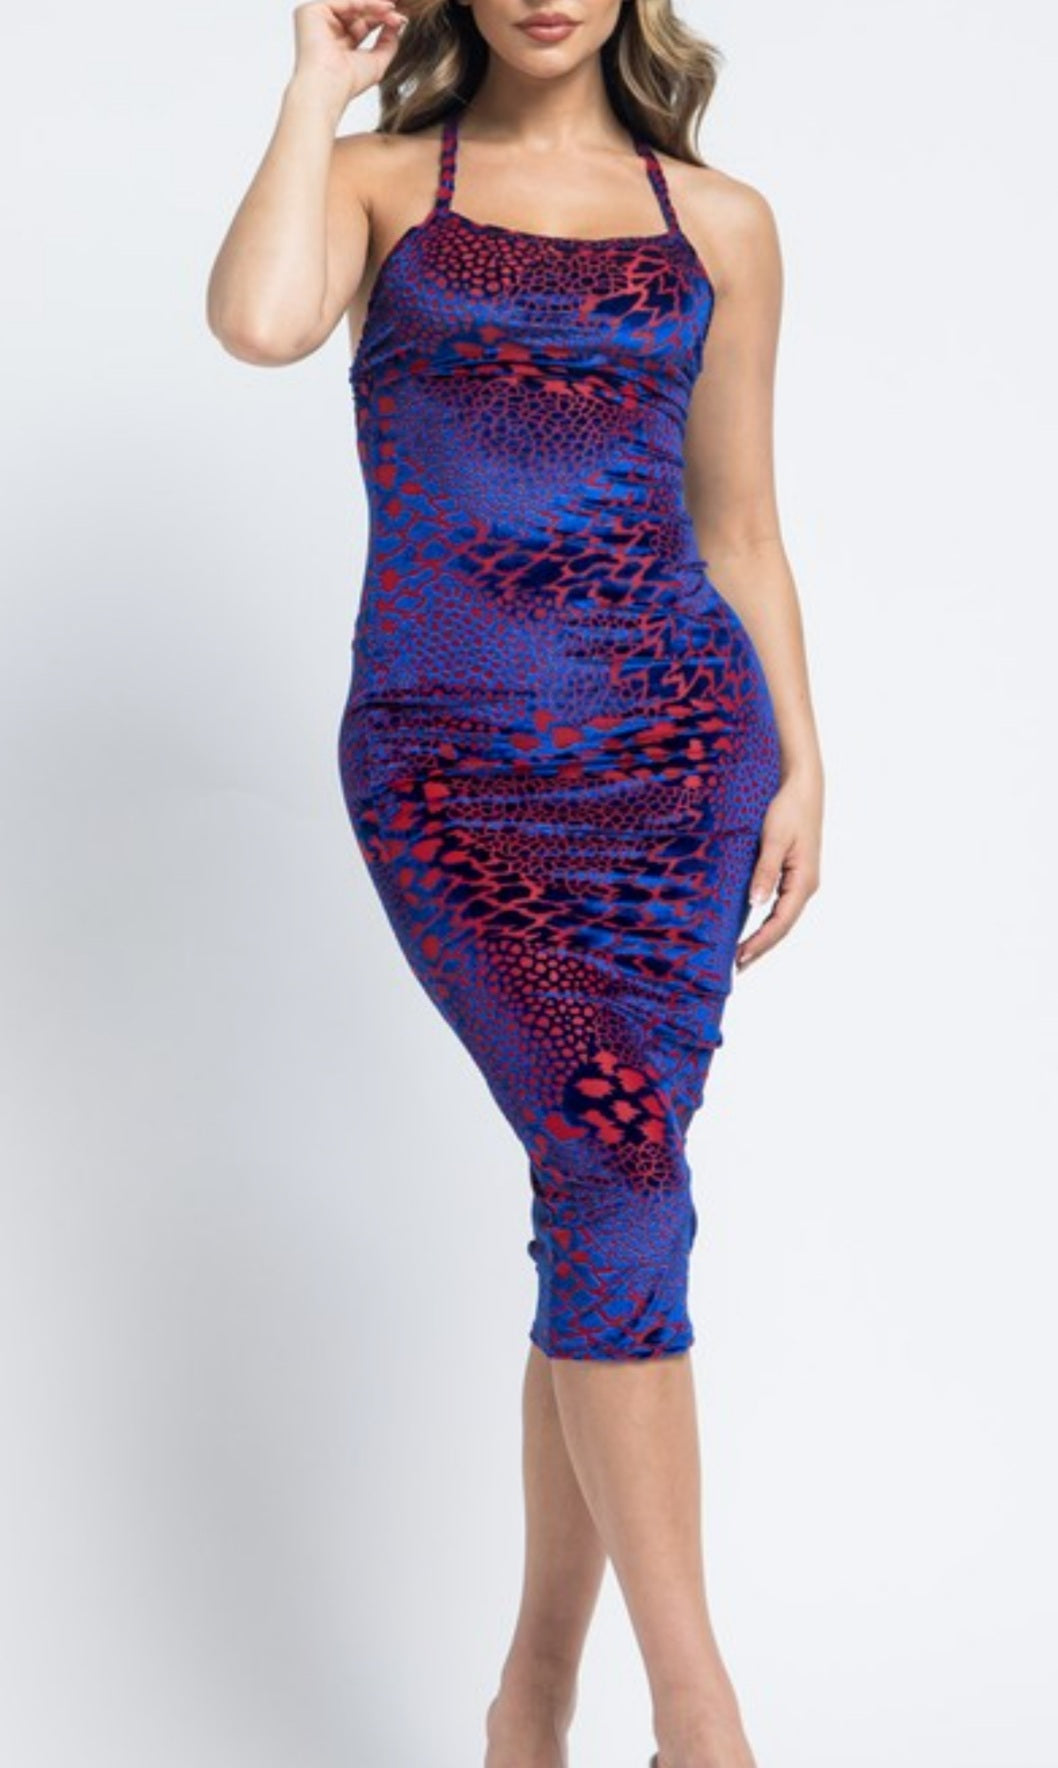 The Crackle Fitted Dress